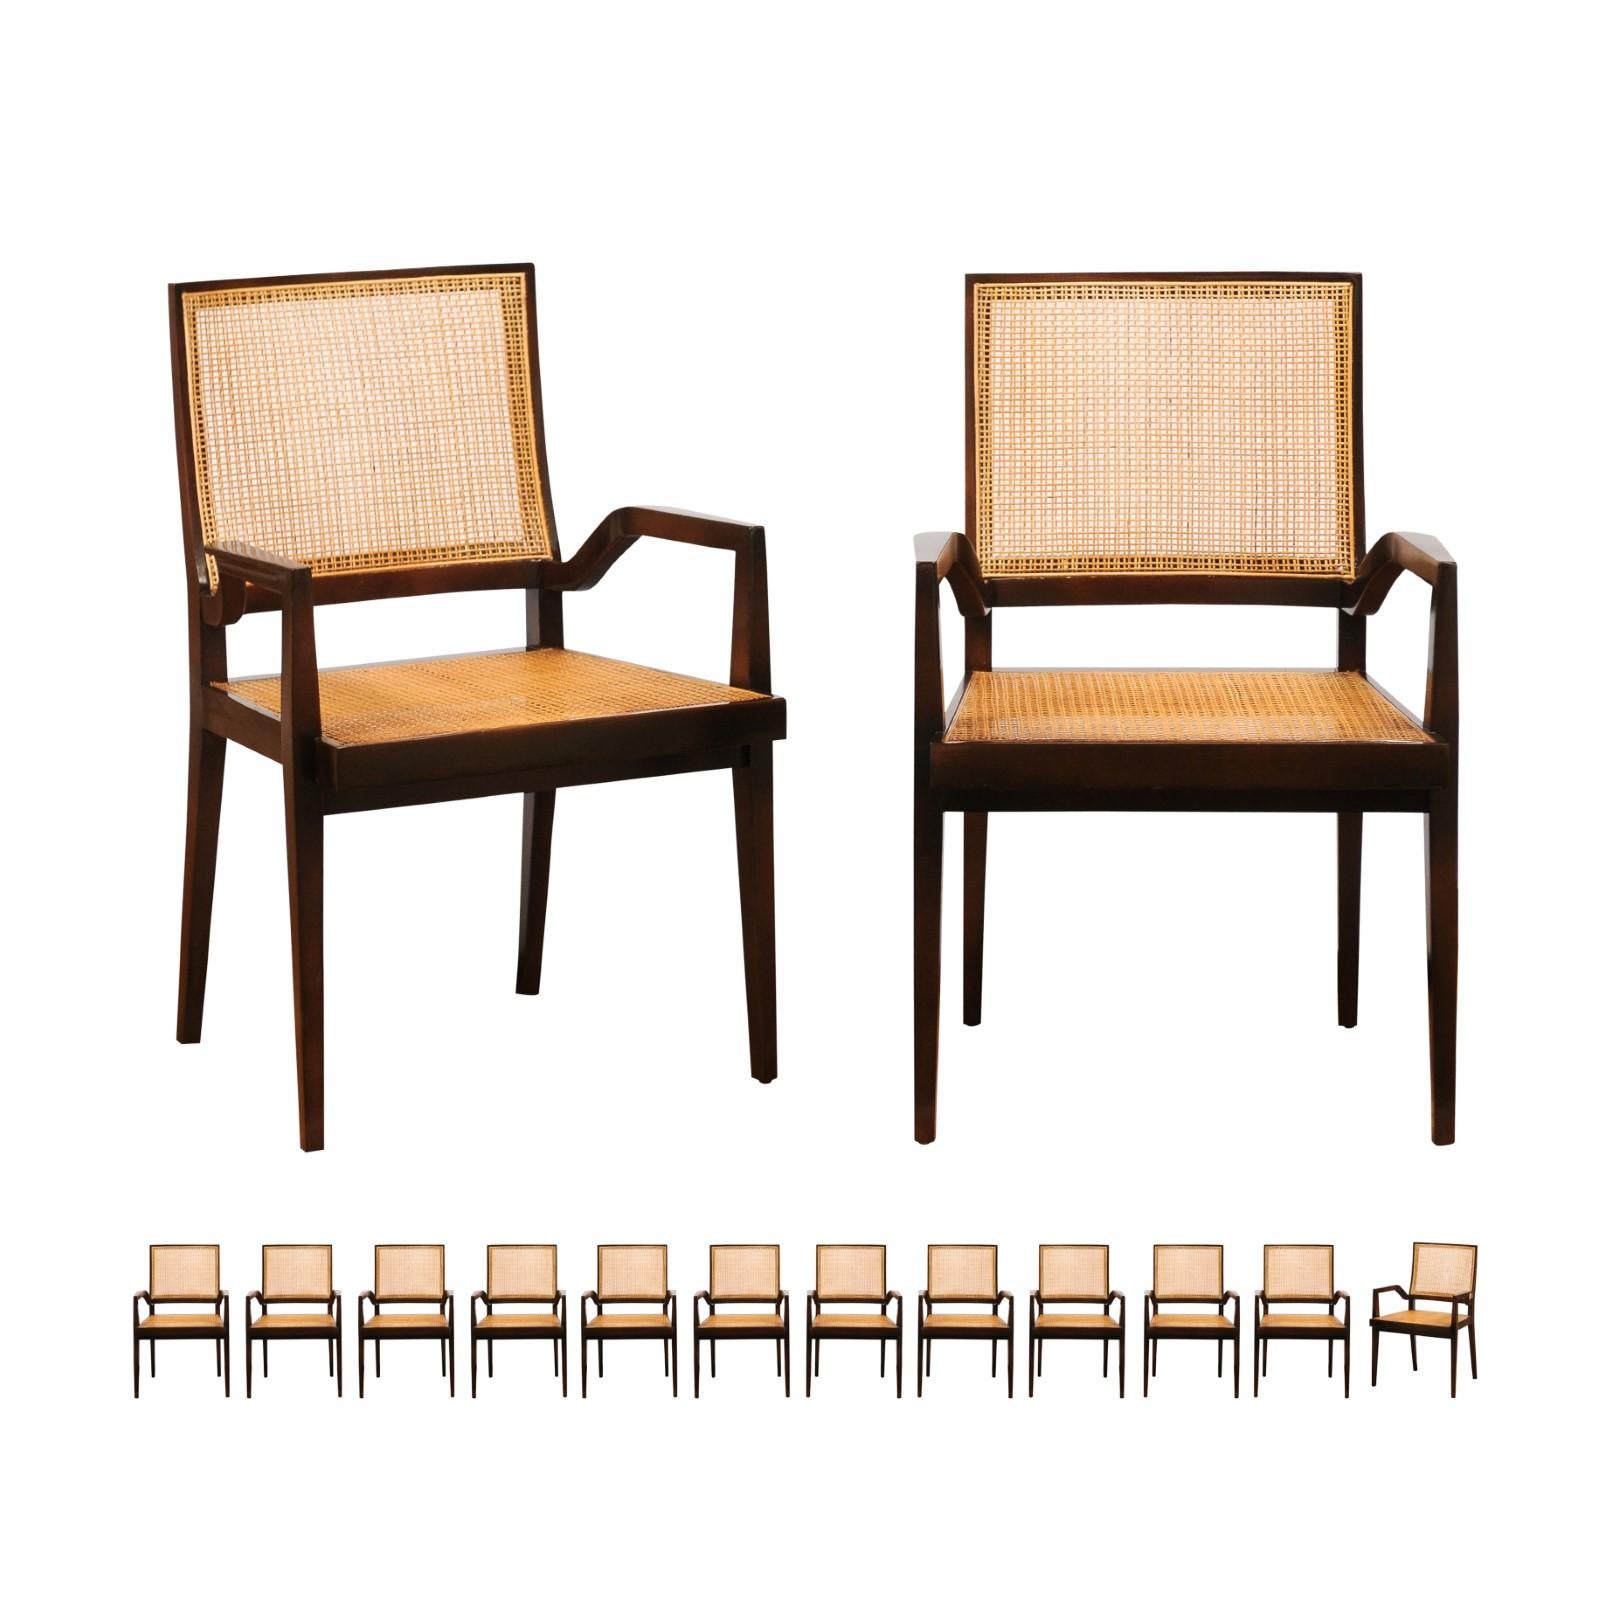 This large ALL ARMS set of impossible to find seating examples is unique on the World market. These magnificent dining chairs are shipped as professionally photographed and described in the listing narrative, completely installation ready. All cane